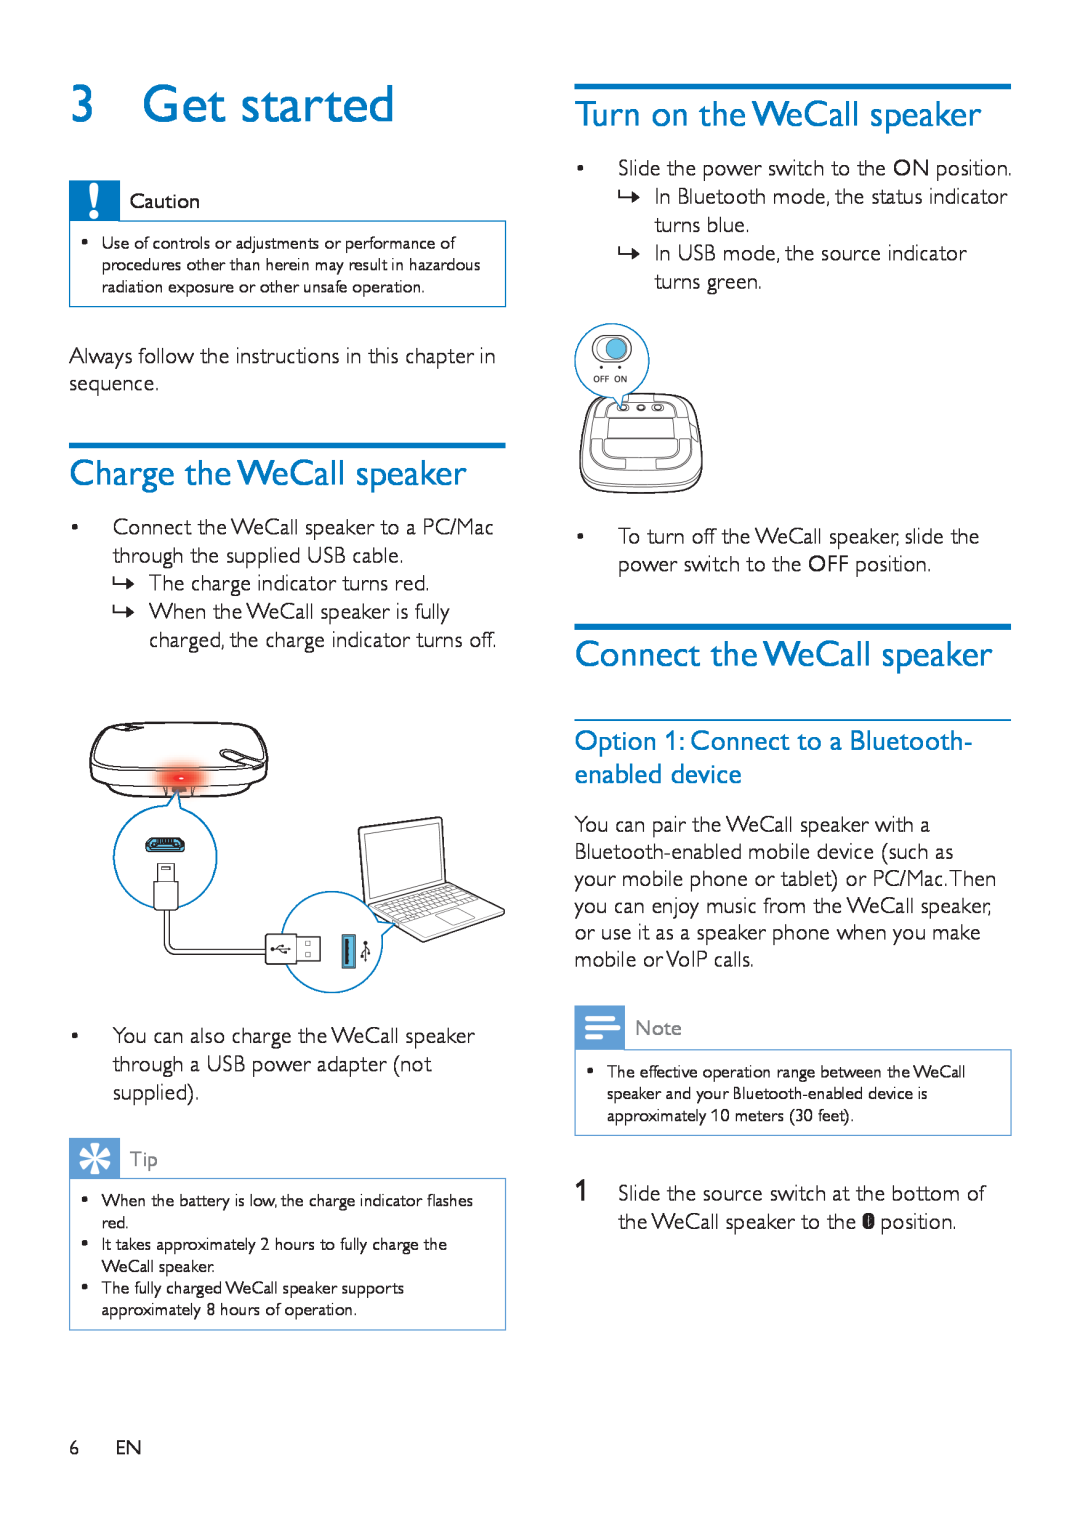 Philips AECS7000 user manual Get started, Turn on the WeCall speaker, Charge the WeCall speaker, Connect the WeCall speaker 